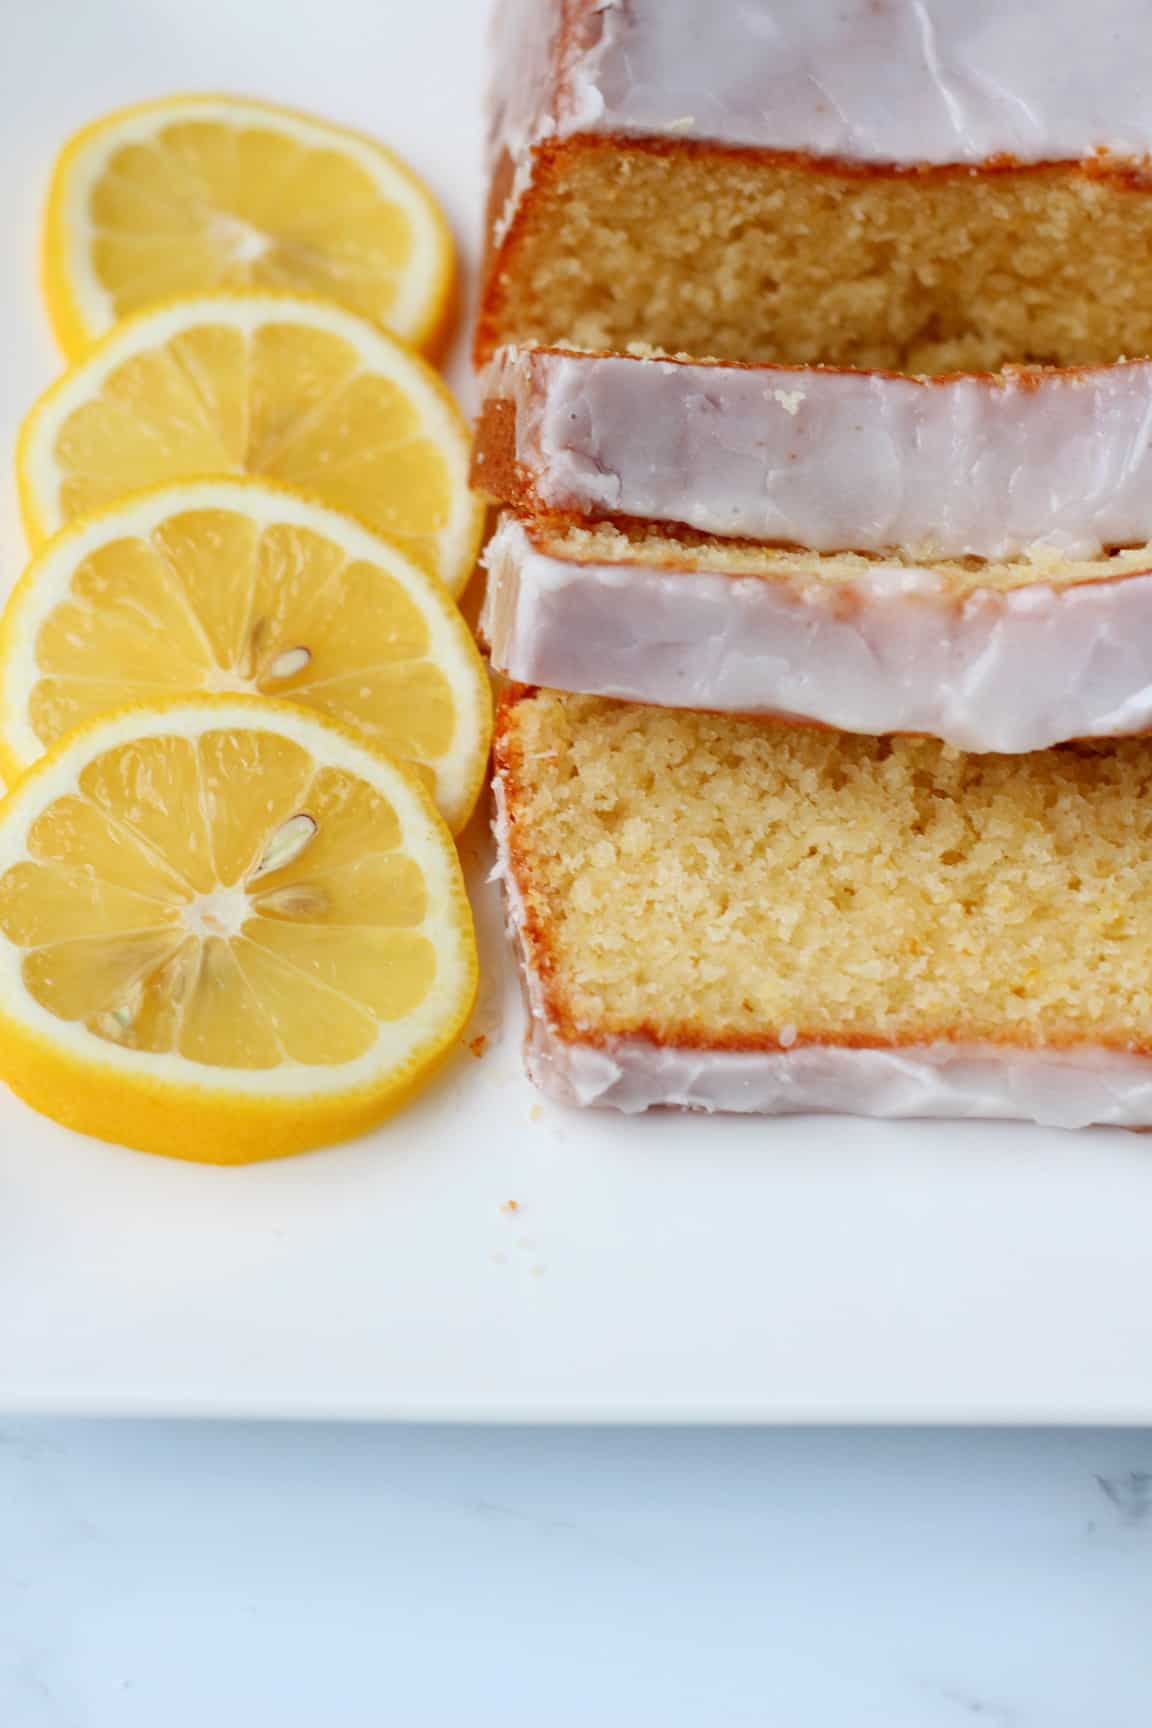 Lemon pound cake cut in slices with slices  of lemons for decoration